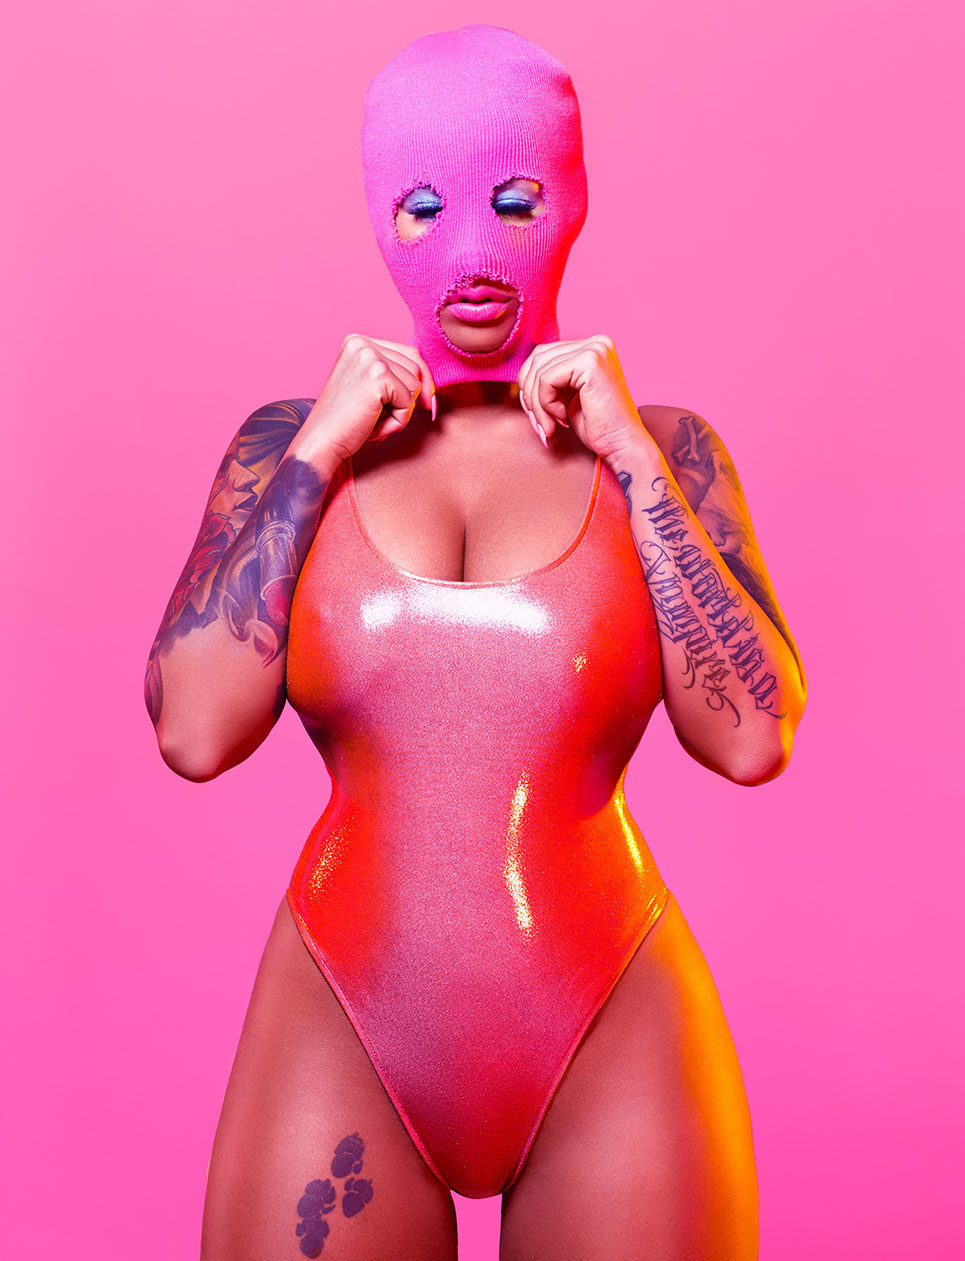 Amber rose naked pussy